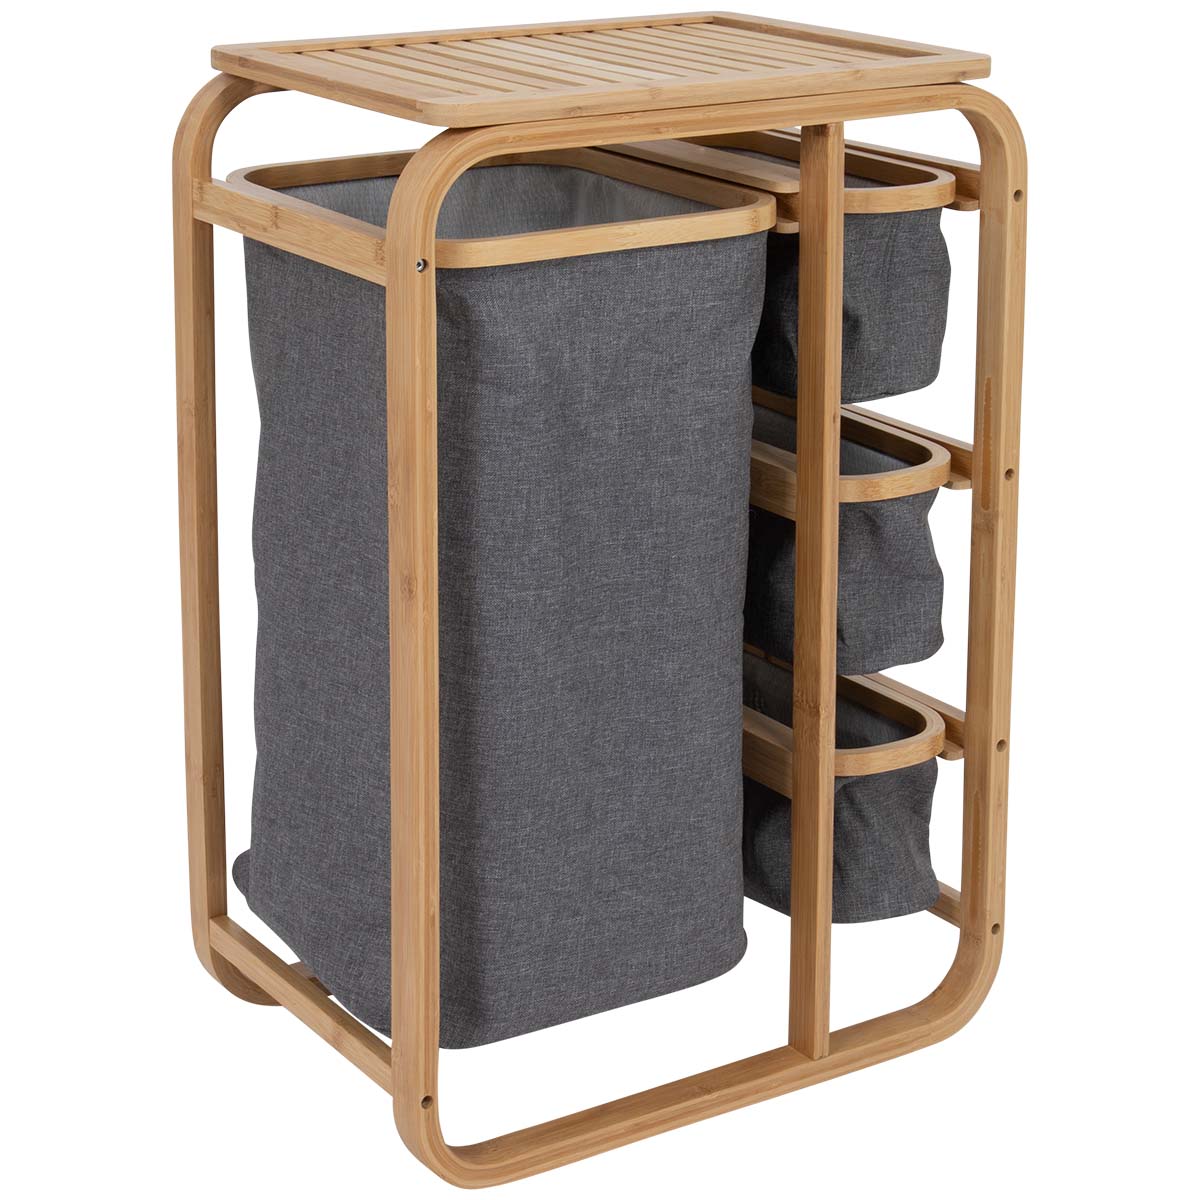 1609327 A stylish cabinet from the Urban outdoor collection. The cabinet features a sturdy bamboo frame with stable top. The cabinet includes 4 extendable baskets. Ideal for camping or home use.